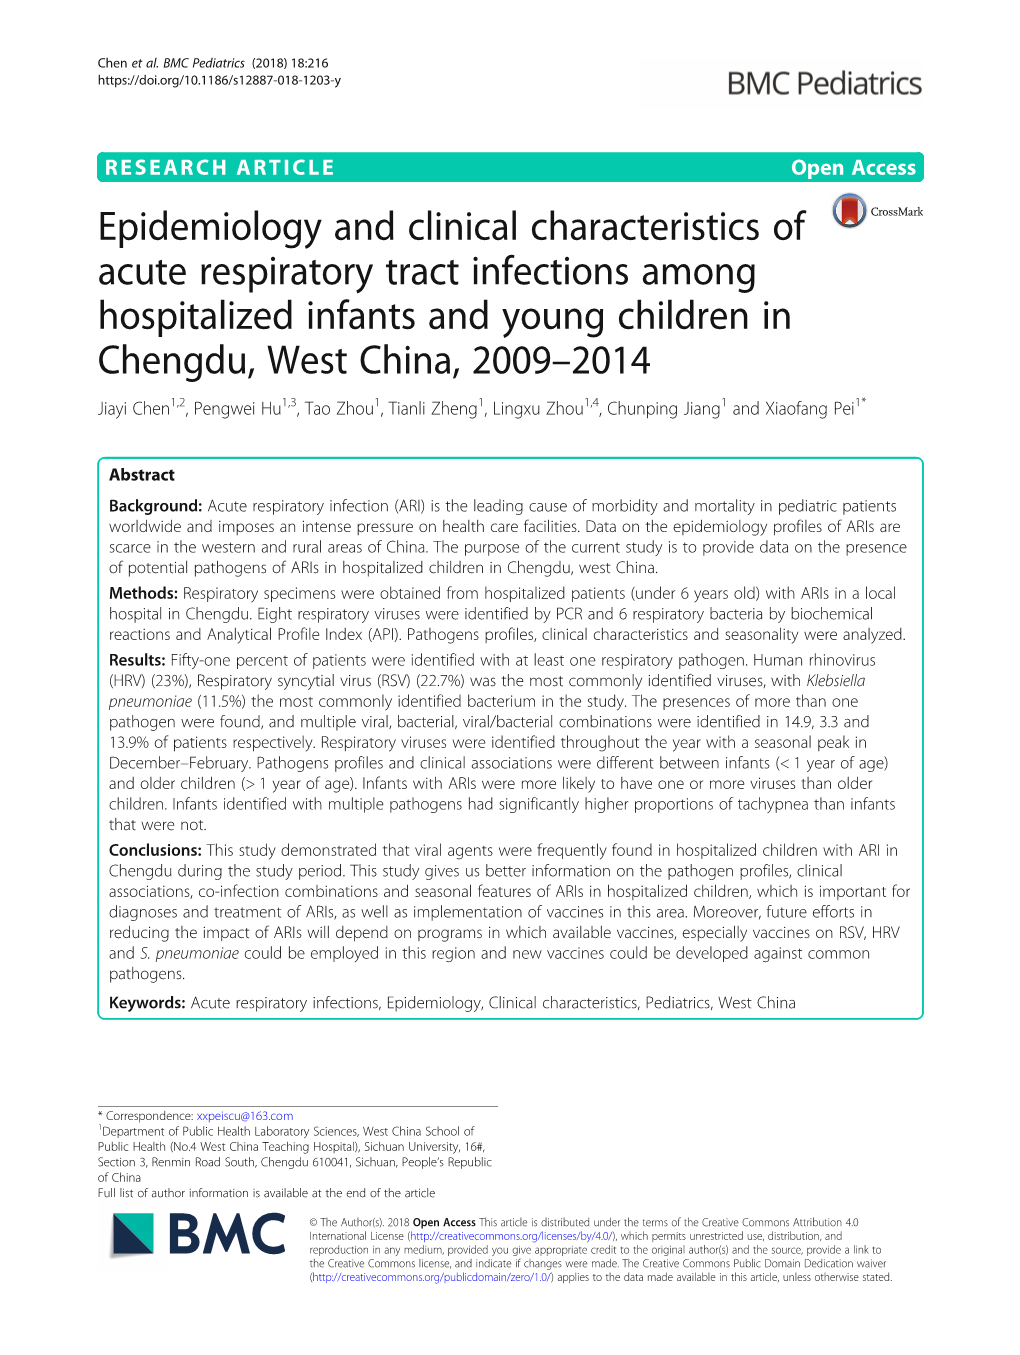 Epidemiology and Clinical Characteristics of Acute Respiratory